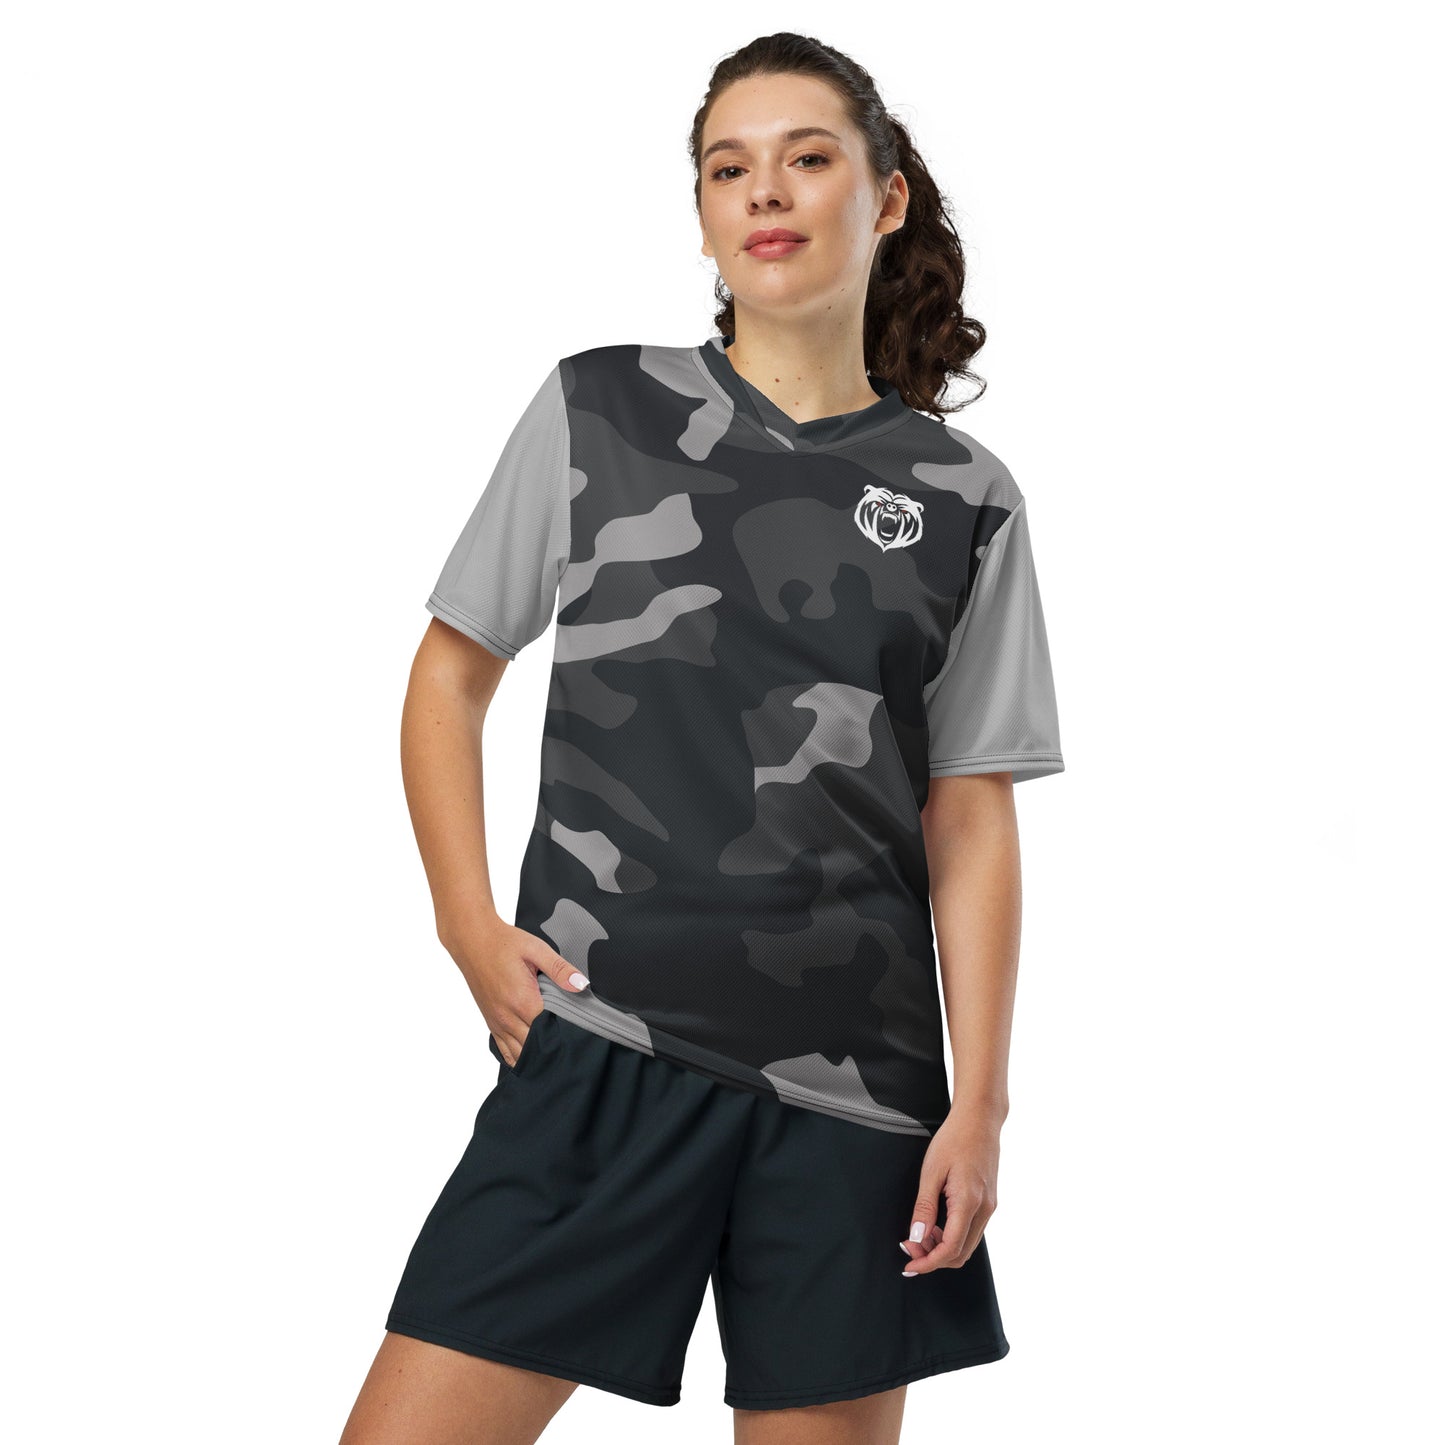 Recycled Unisex Jersey - Camo1